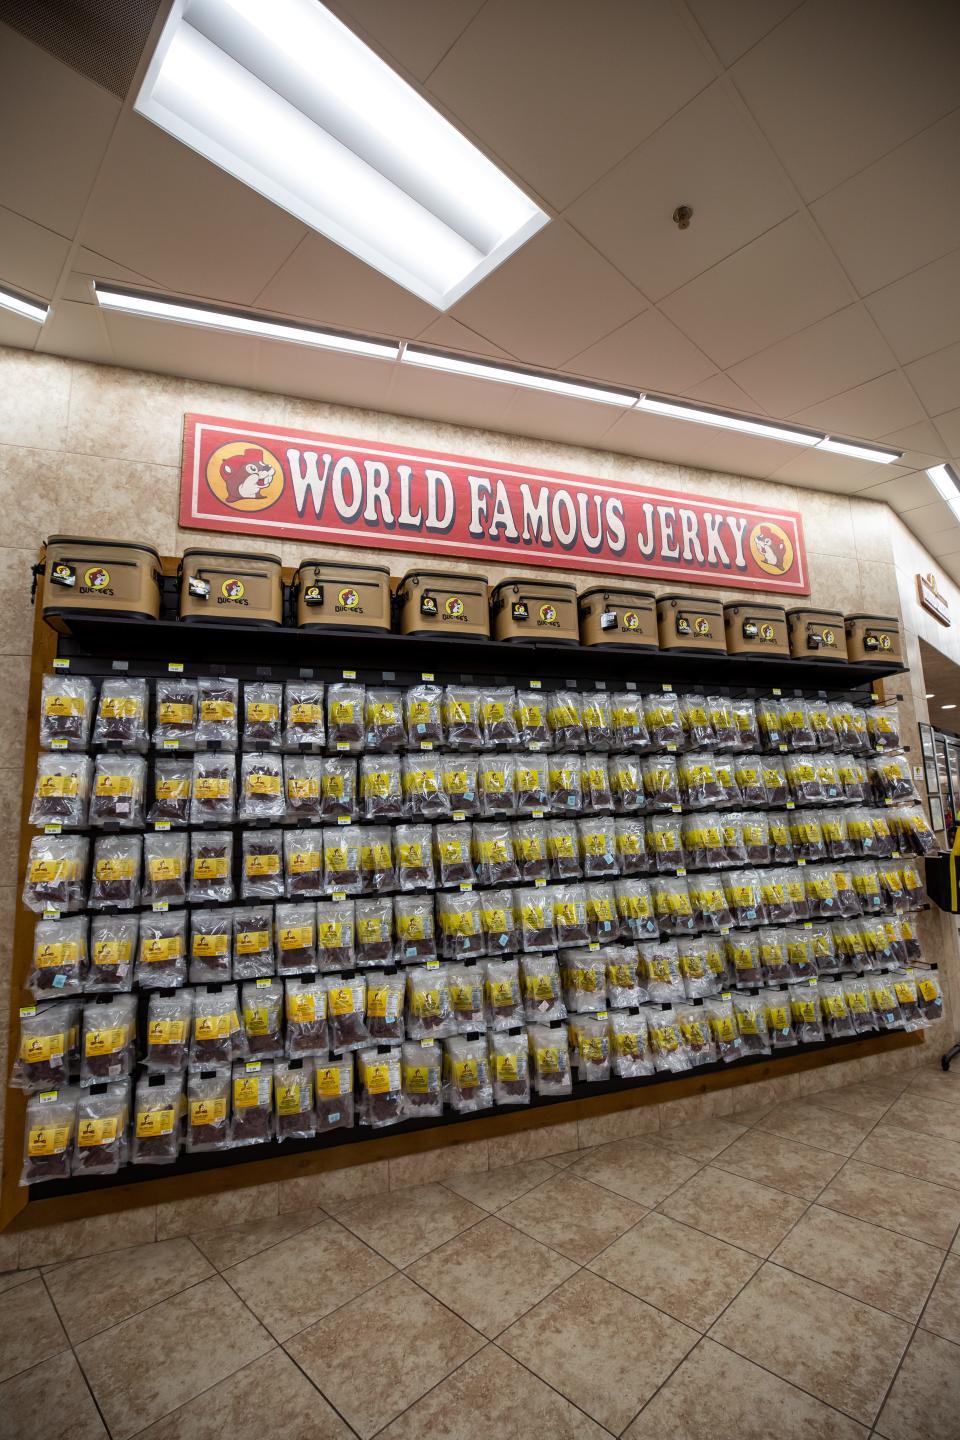 The wall of world-famous jerky is a stable at Buc-ee's locations.